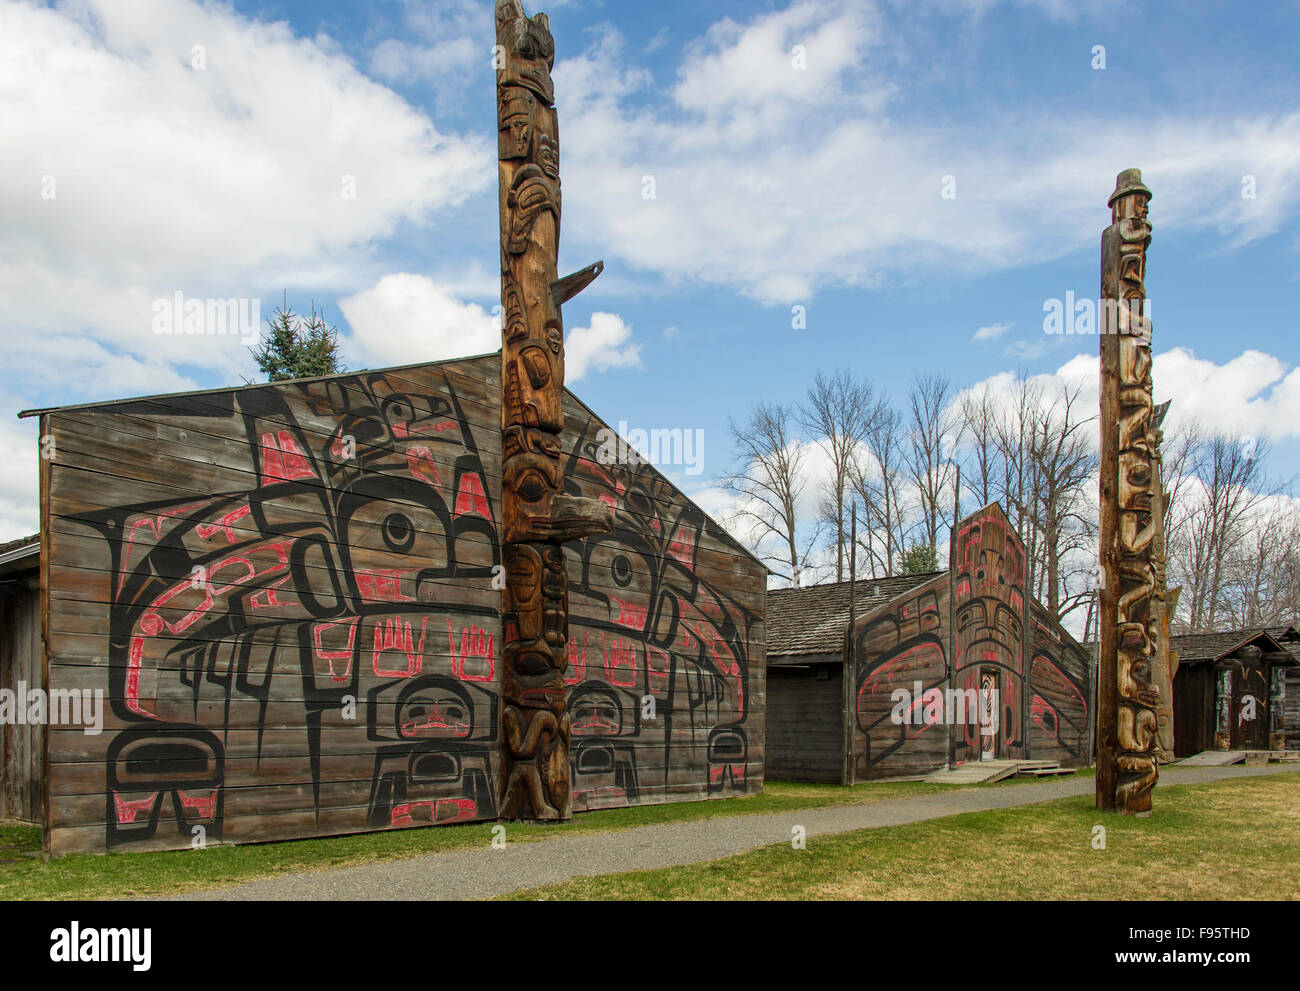 Ksan Historical Village, a replica of an ancient Gitxsan village situated at the confluence of the Skeena and Bulkley rivers, Stock Photo